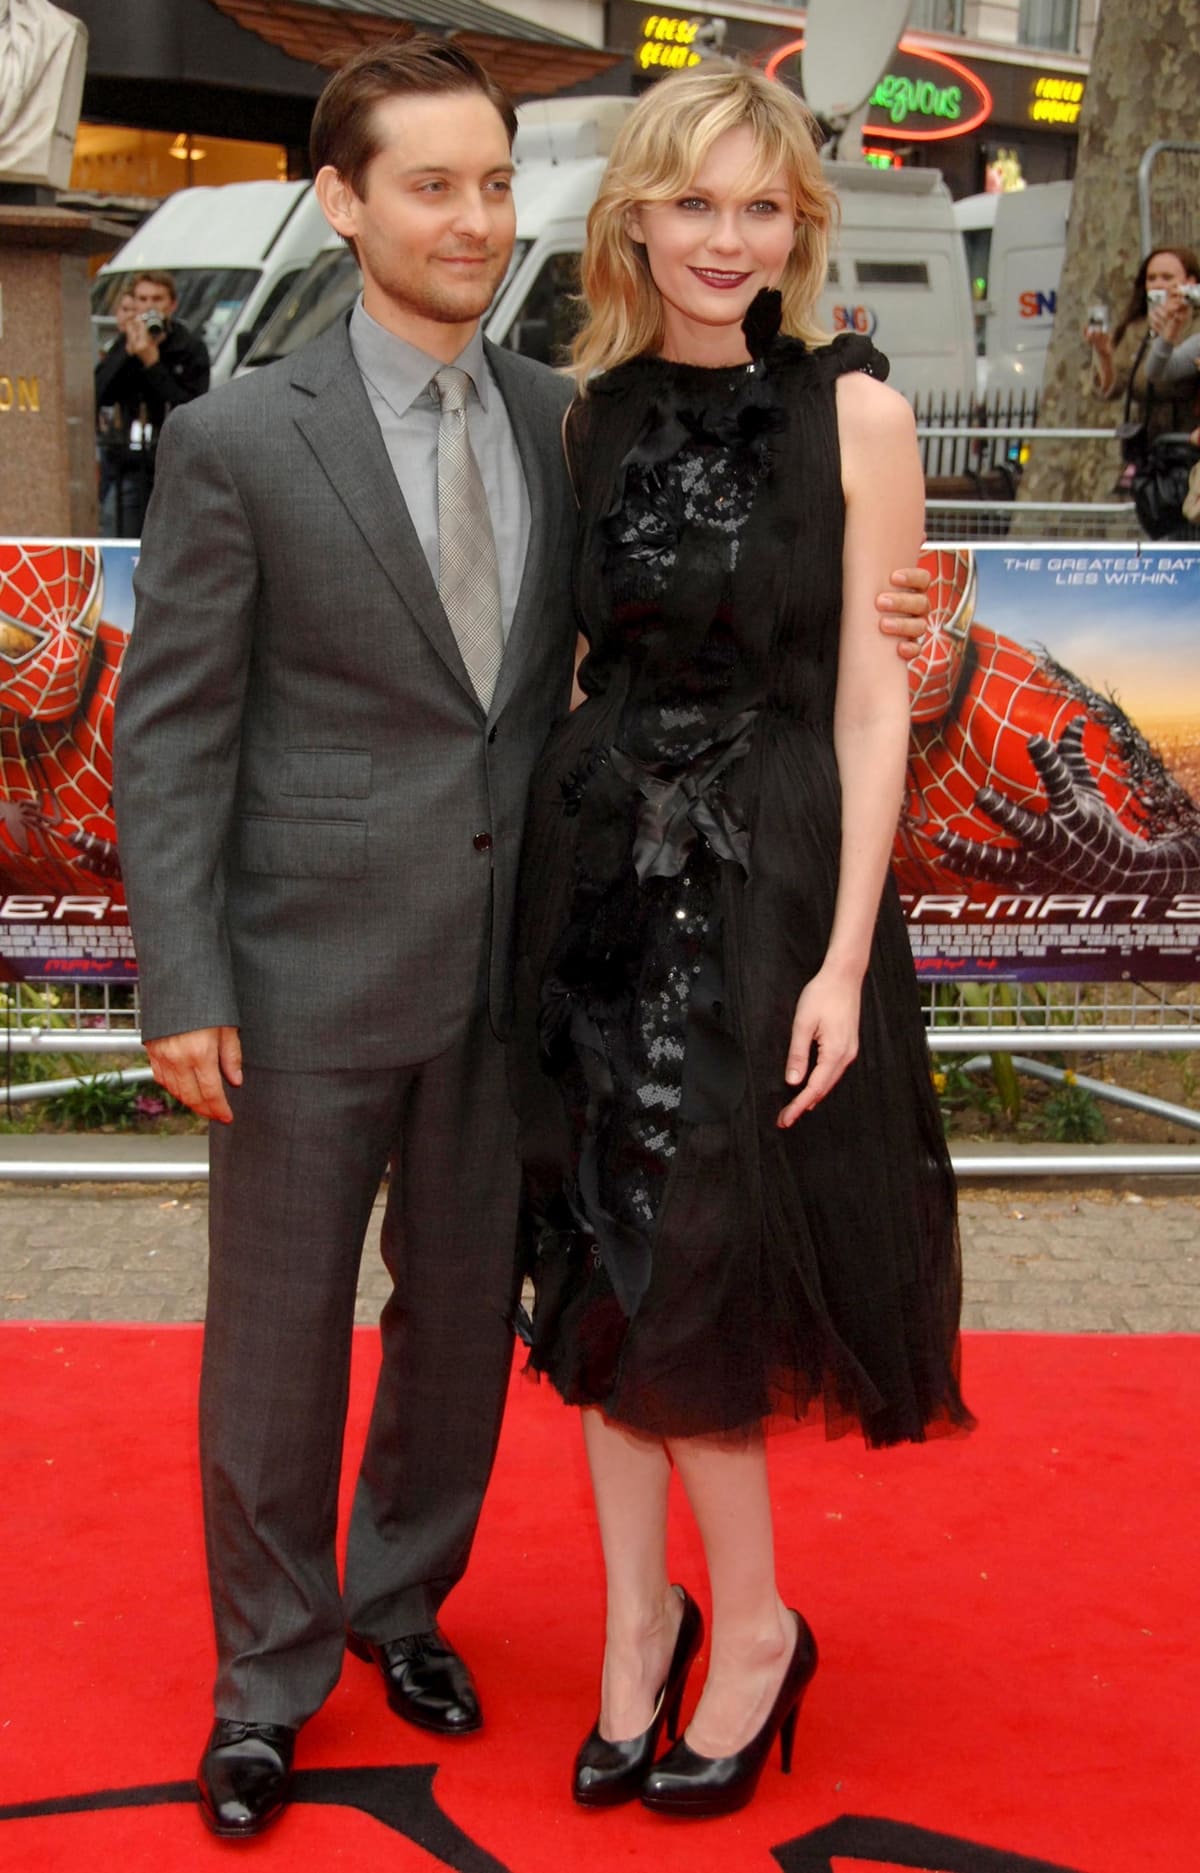 Tobey Maguire and Kirsten Dunst attend the UK premiere of the 2007 American superhero film Spider-Man 3